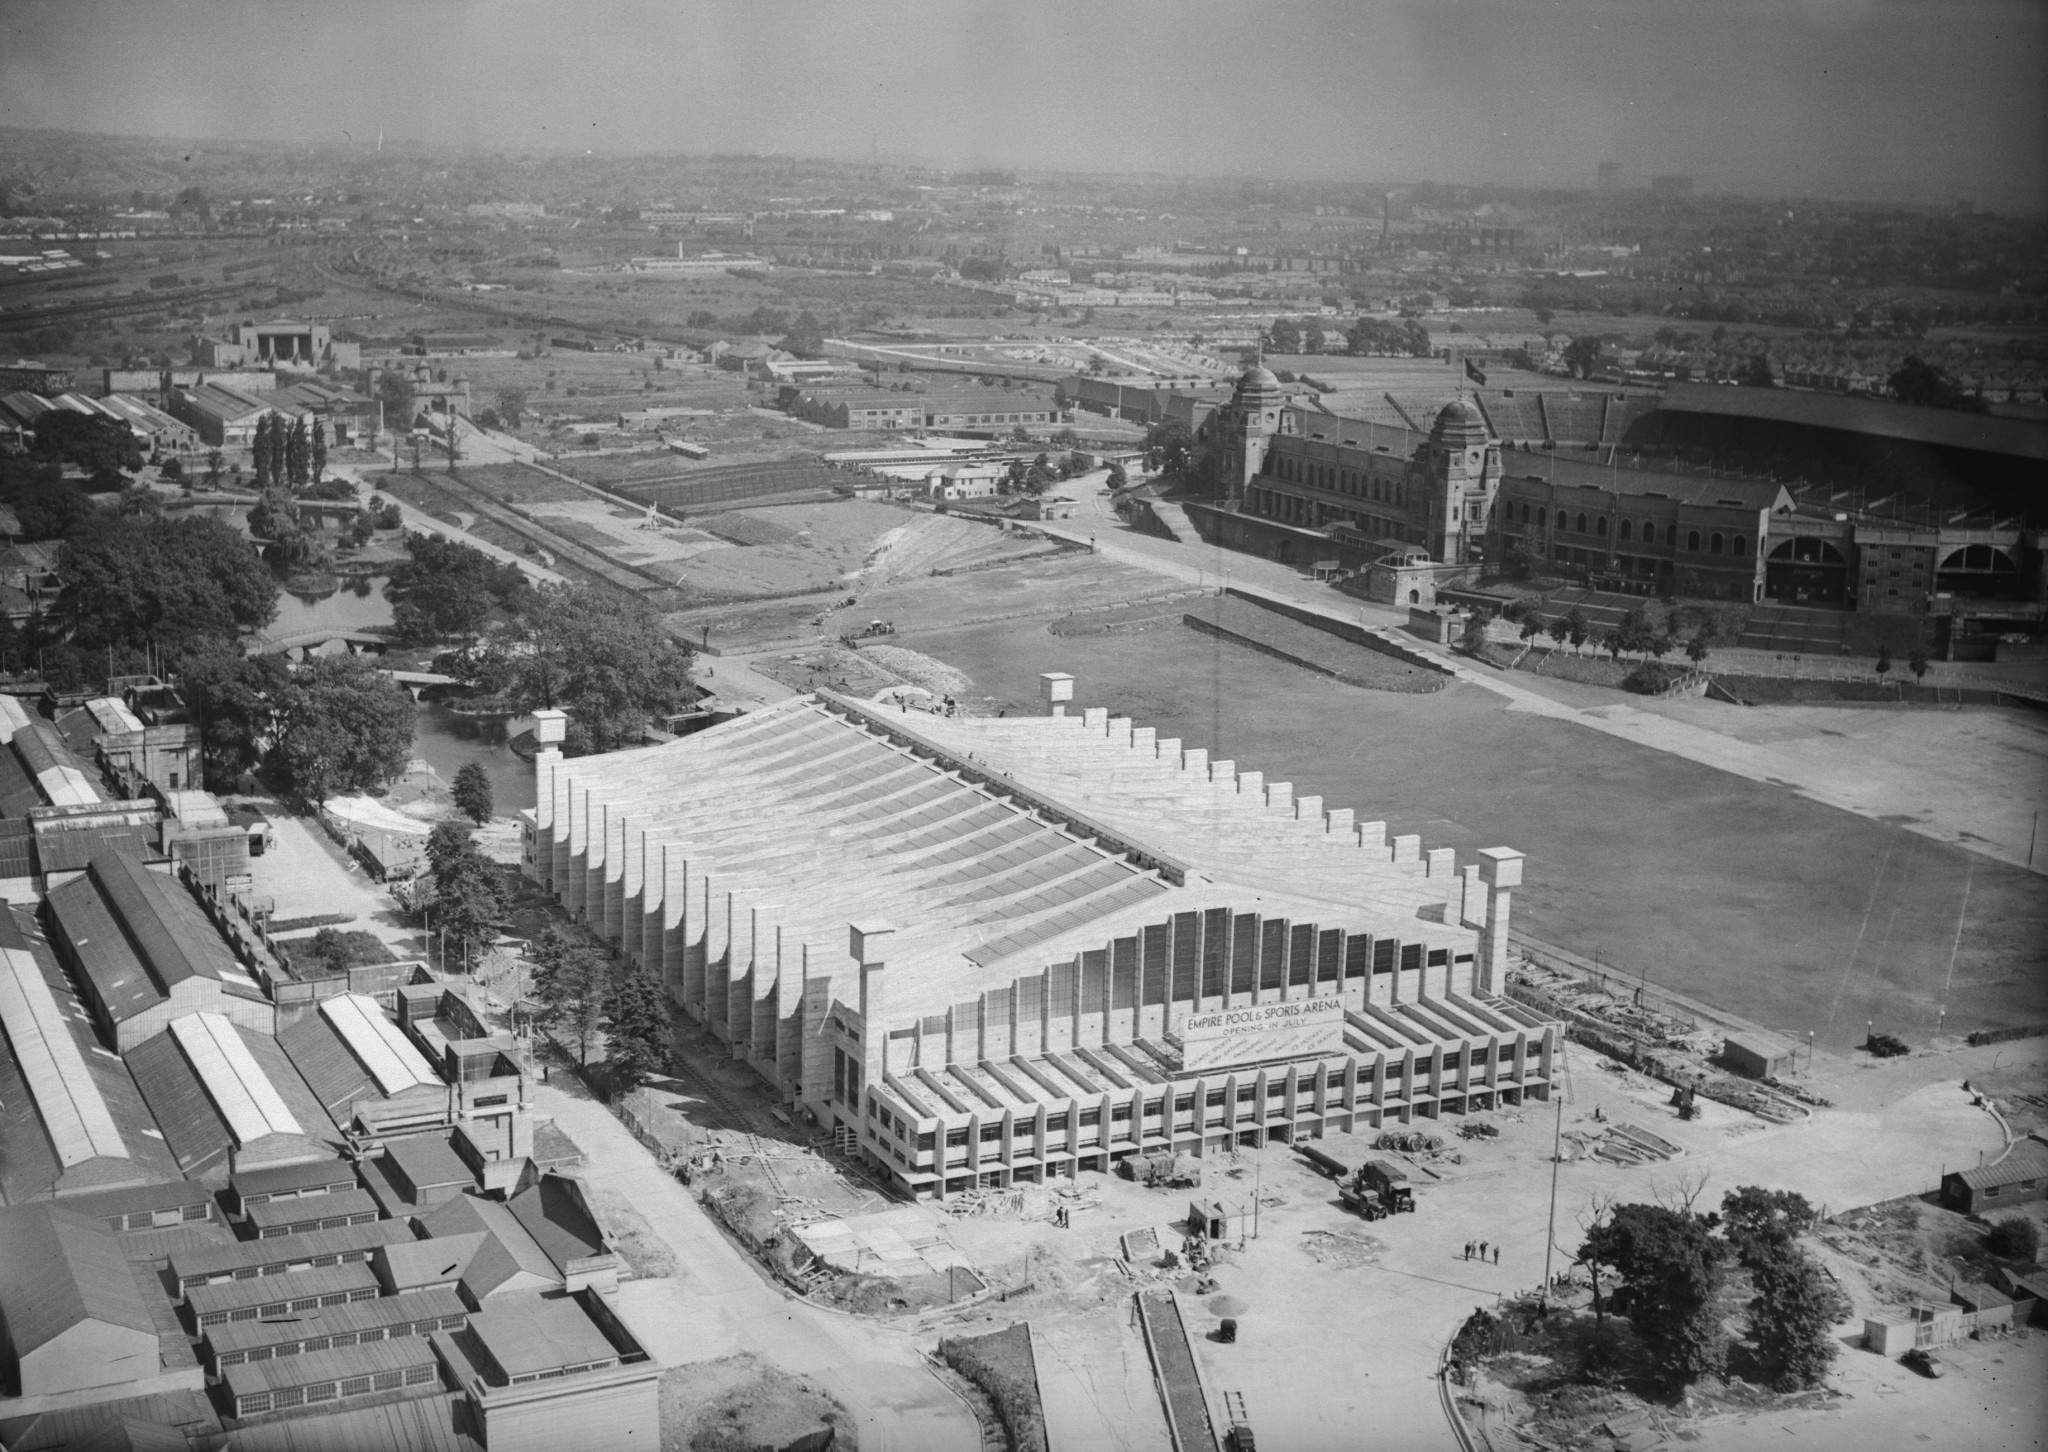 The indoor sports arena built in 1934 close to Wembley Stadium is still in use today ©Getty Images